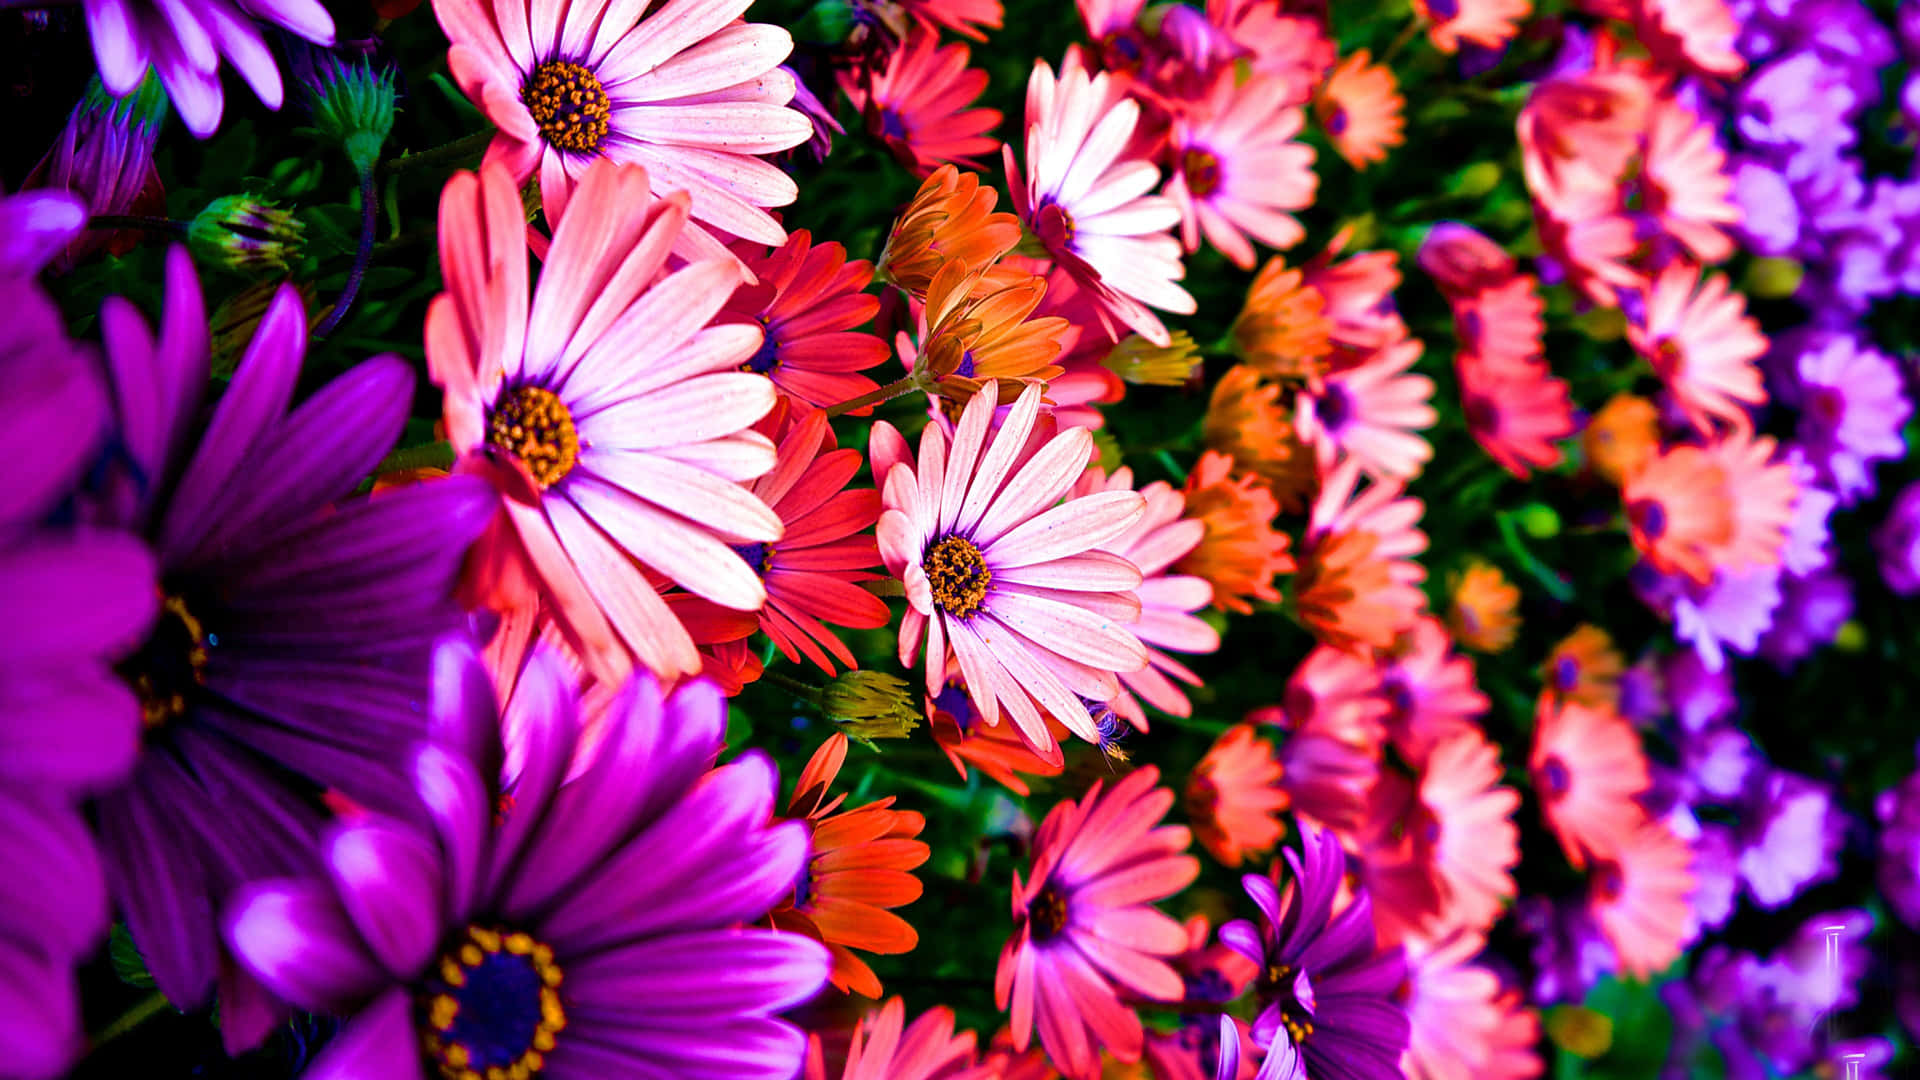 Download Colorful Daisies Wallpaper | Wallpapers.com